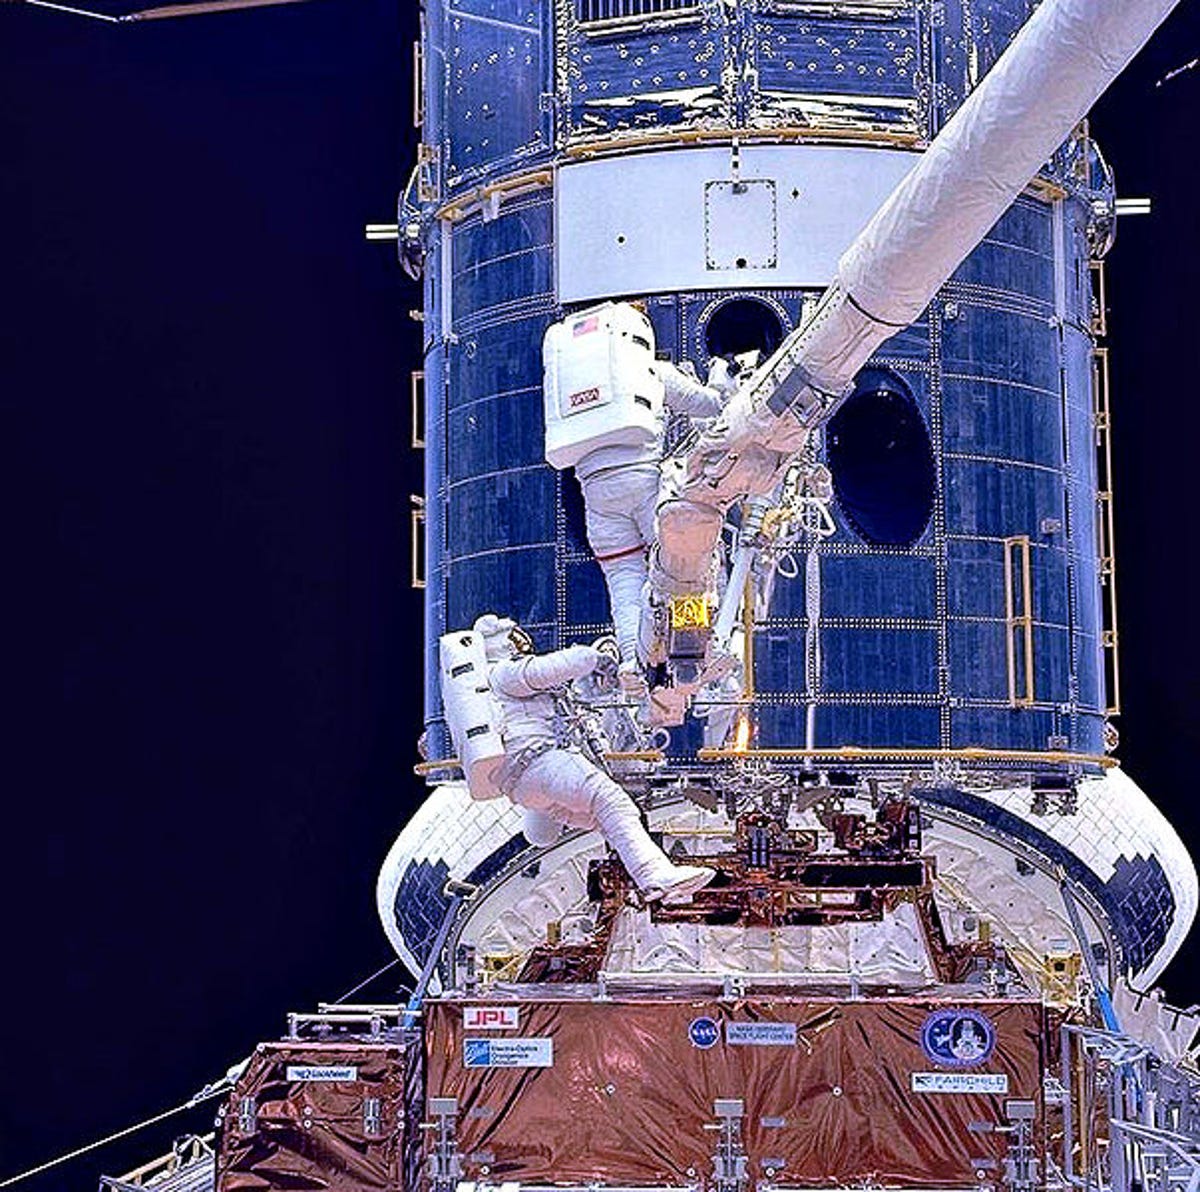 603px-Upgrading_Hubble_during_SM1.jpg